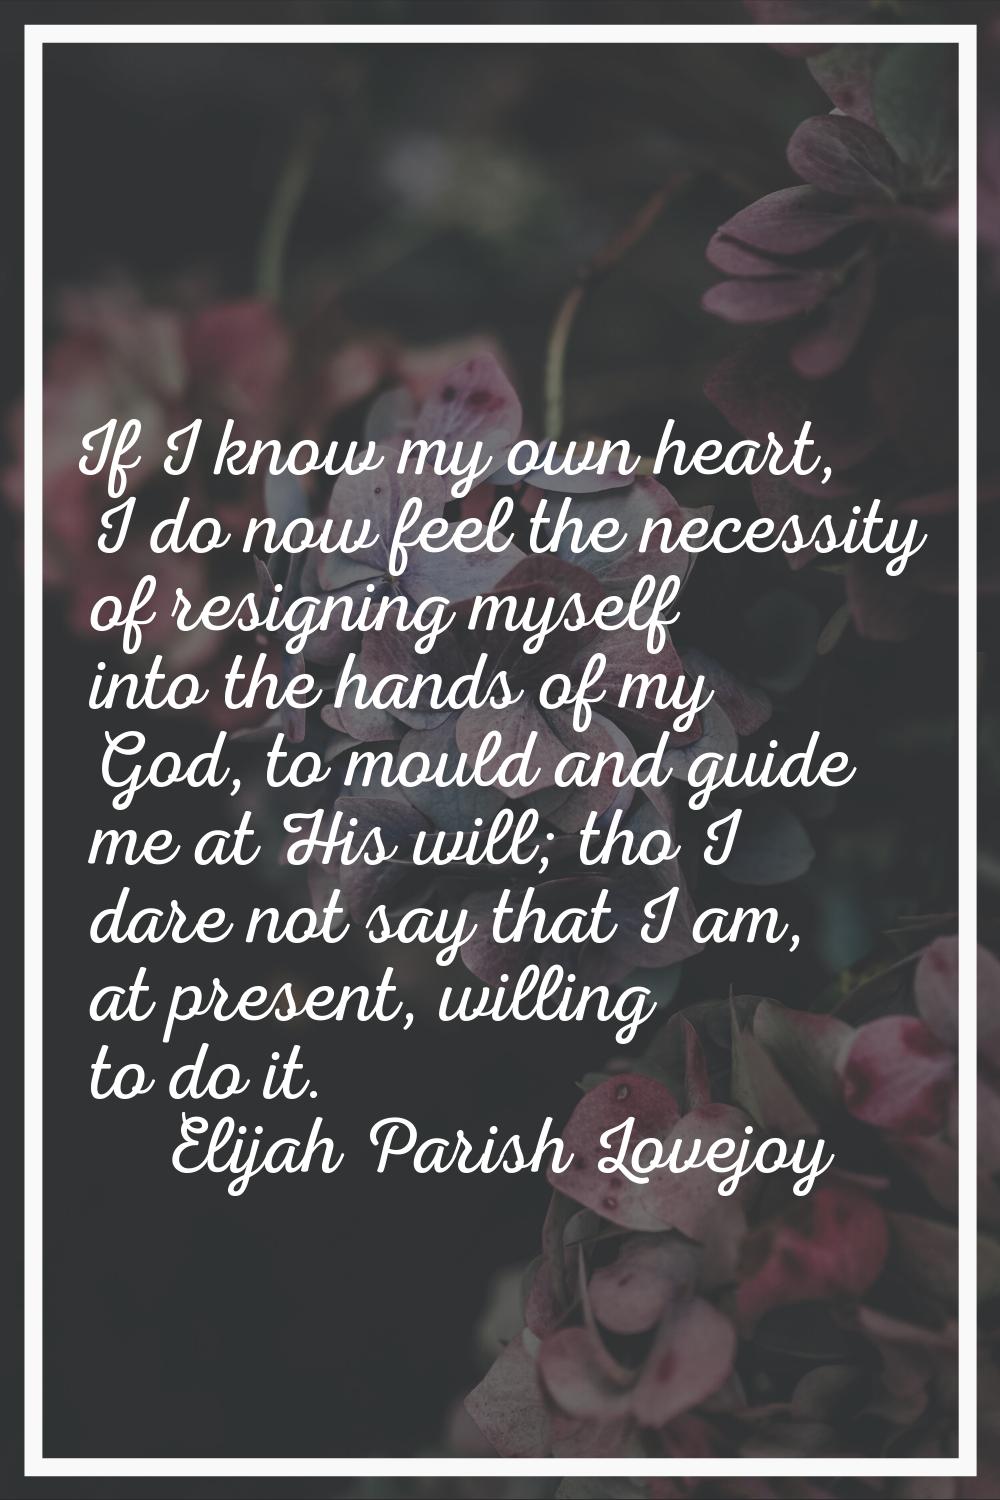 If I know my own heart, I do now feel the necessity of resigning myself into the hands of my God, t